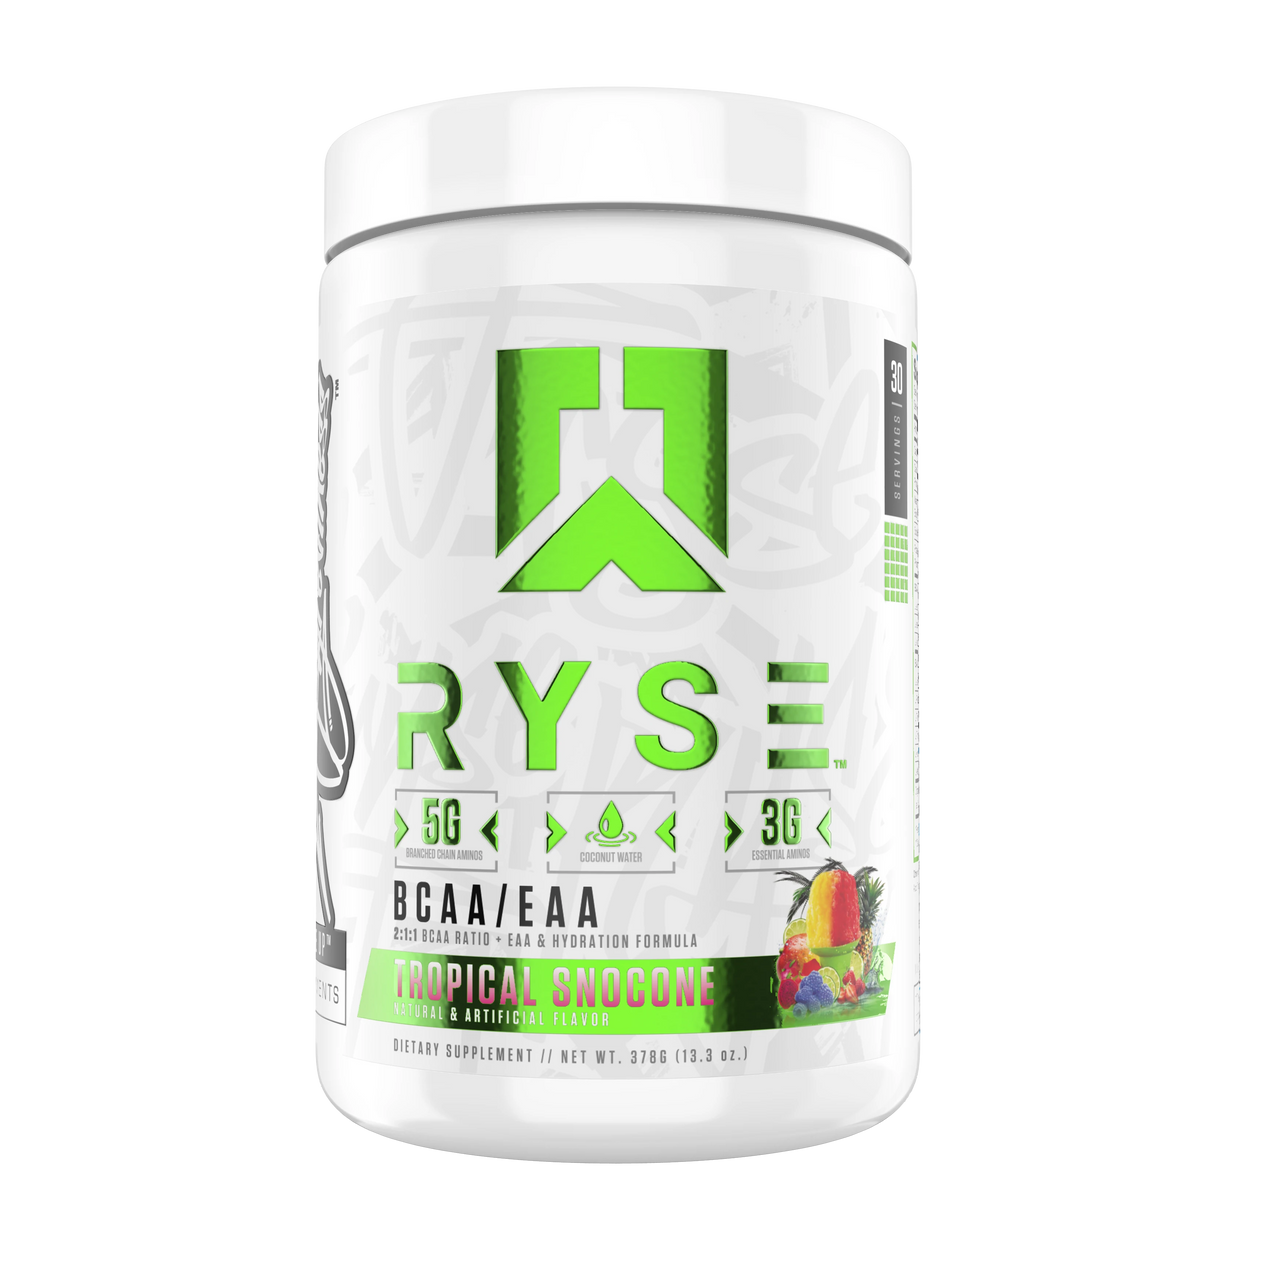 RYSE BCAA/EAA, Tropical Snocone, Branched Chai Amino Acids and Essential Amino Acids, Online Supplements, My Supplements